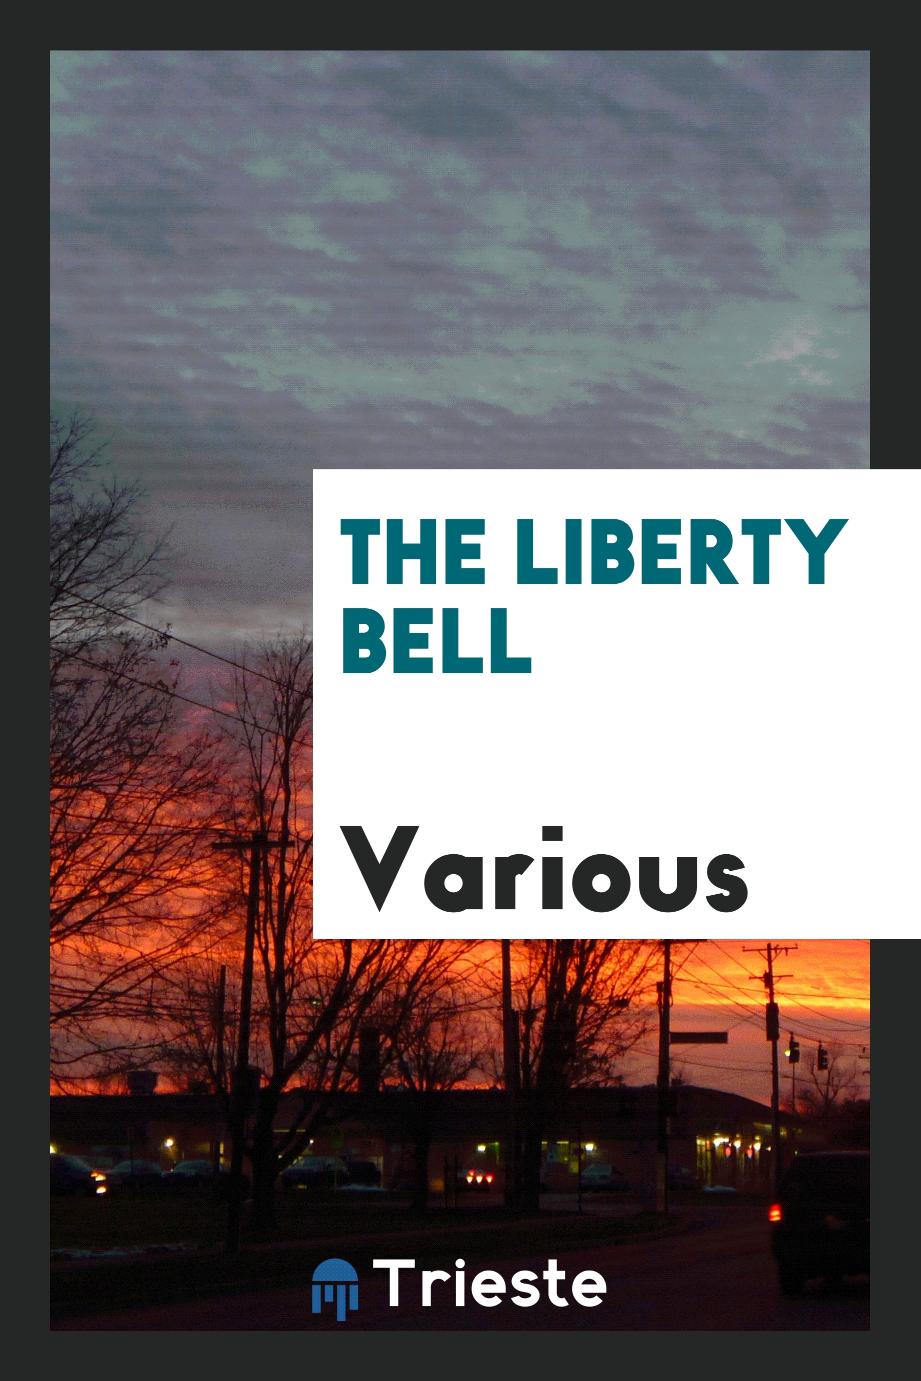 The Liberty bell